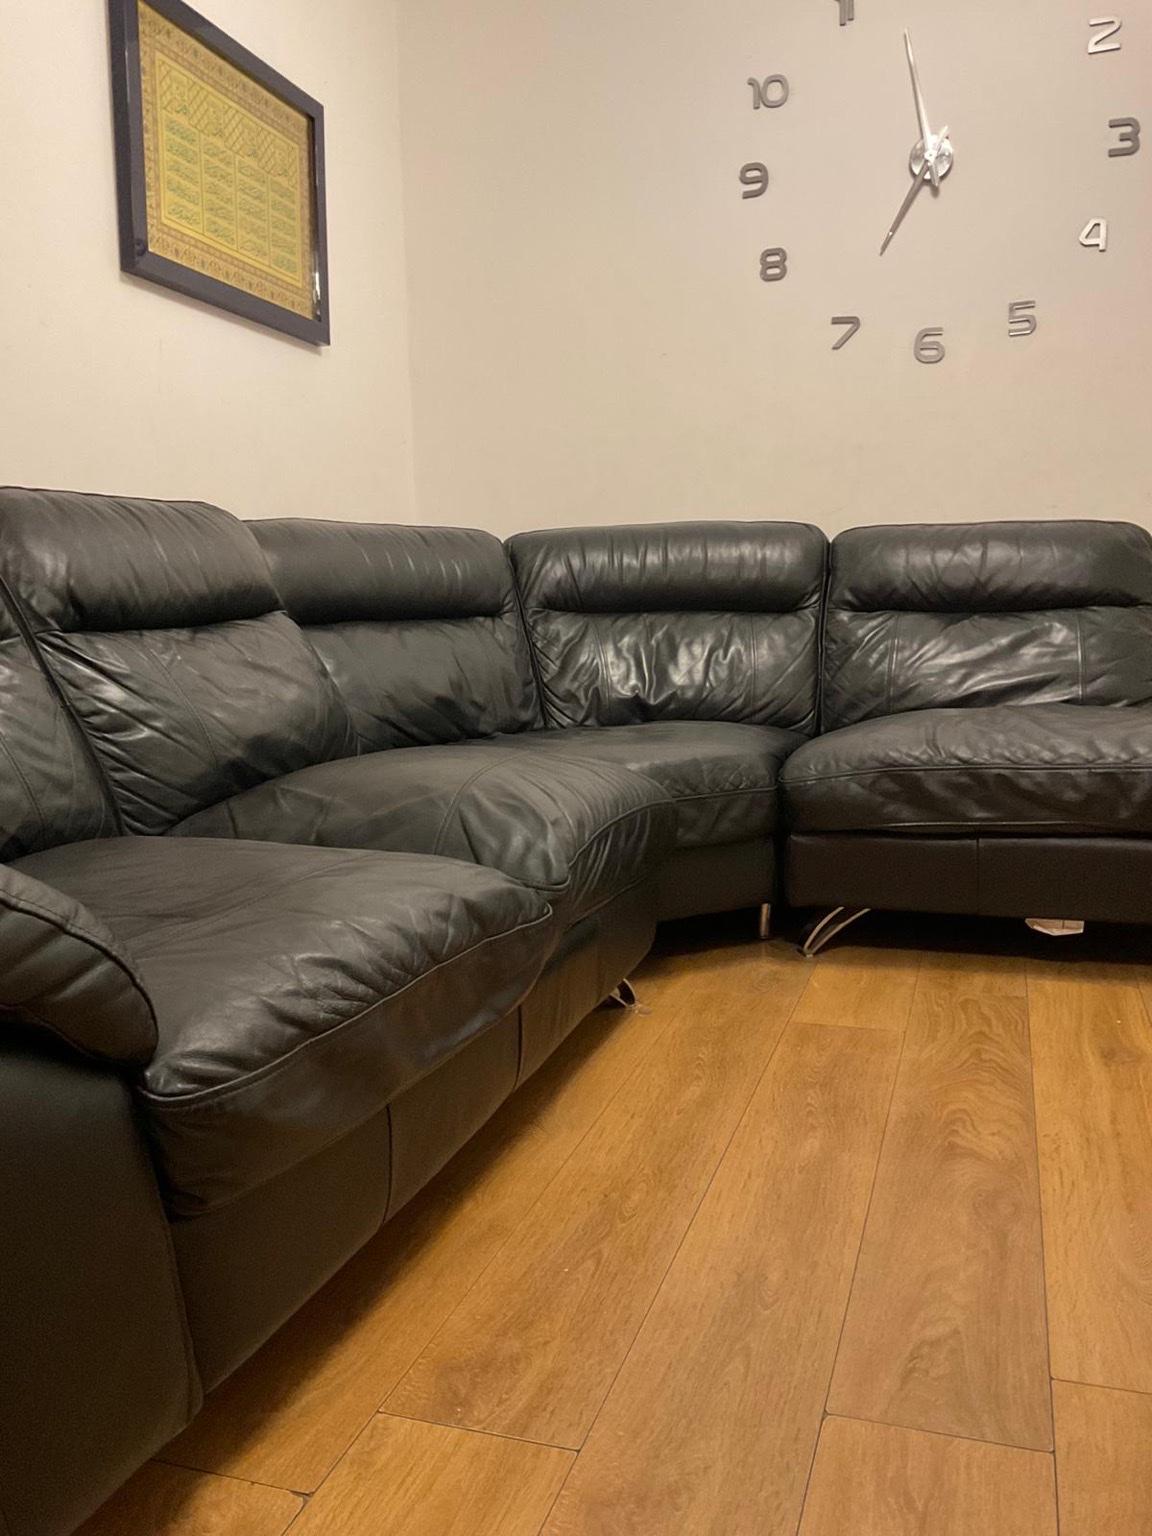 DFS California Brown Leather Modular Corner Sofa for Sale in Worthing, West  Sussex Classified